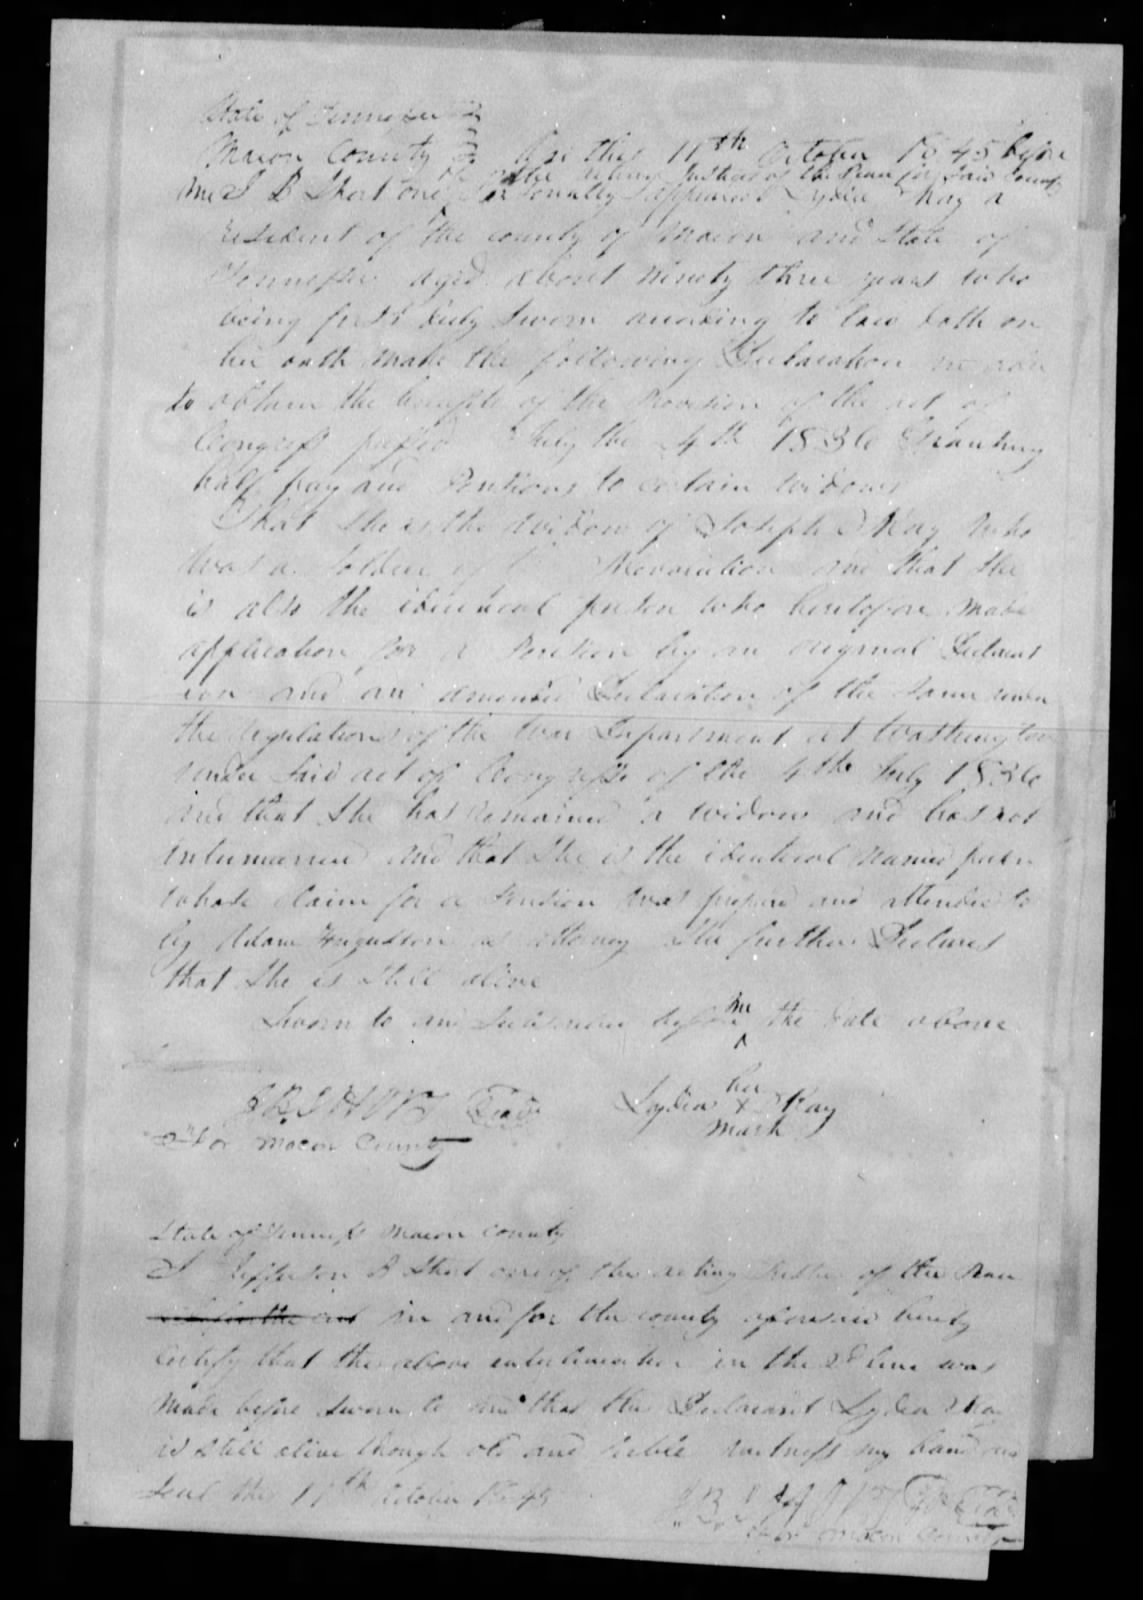 Application for a Widow's Pension from Lydia Ray, 11 October 1845, page 1